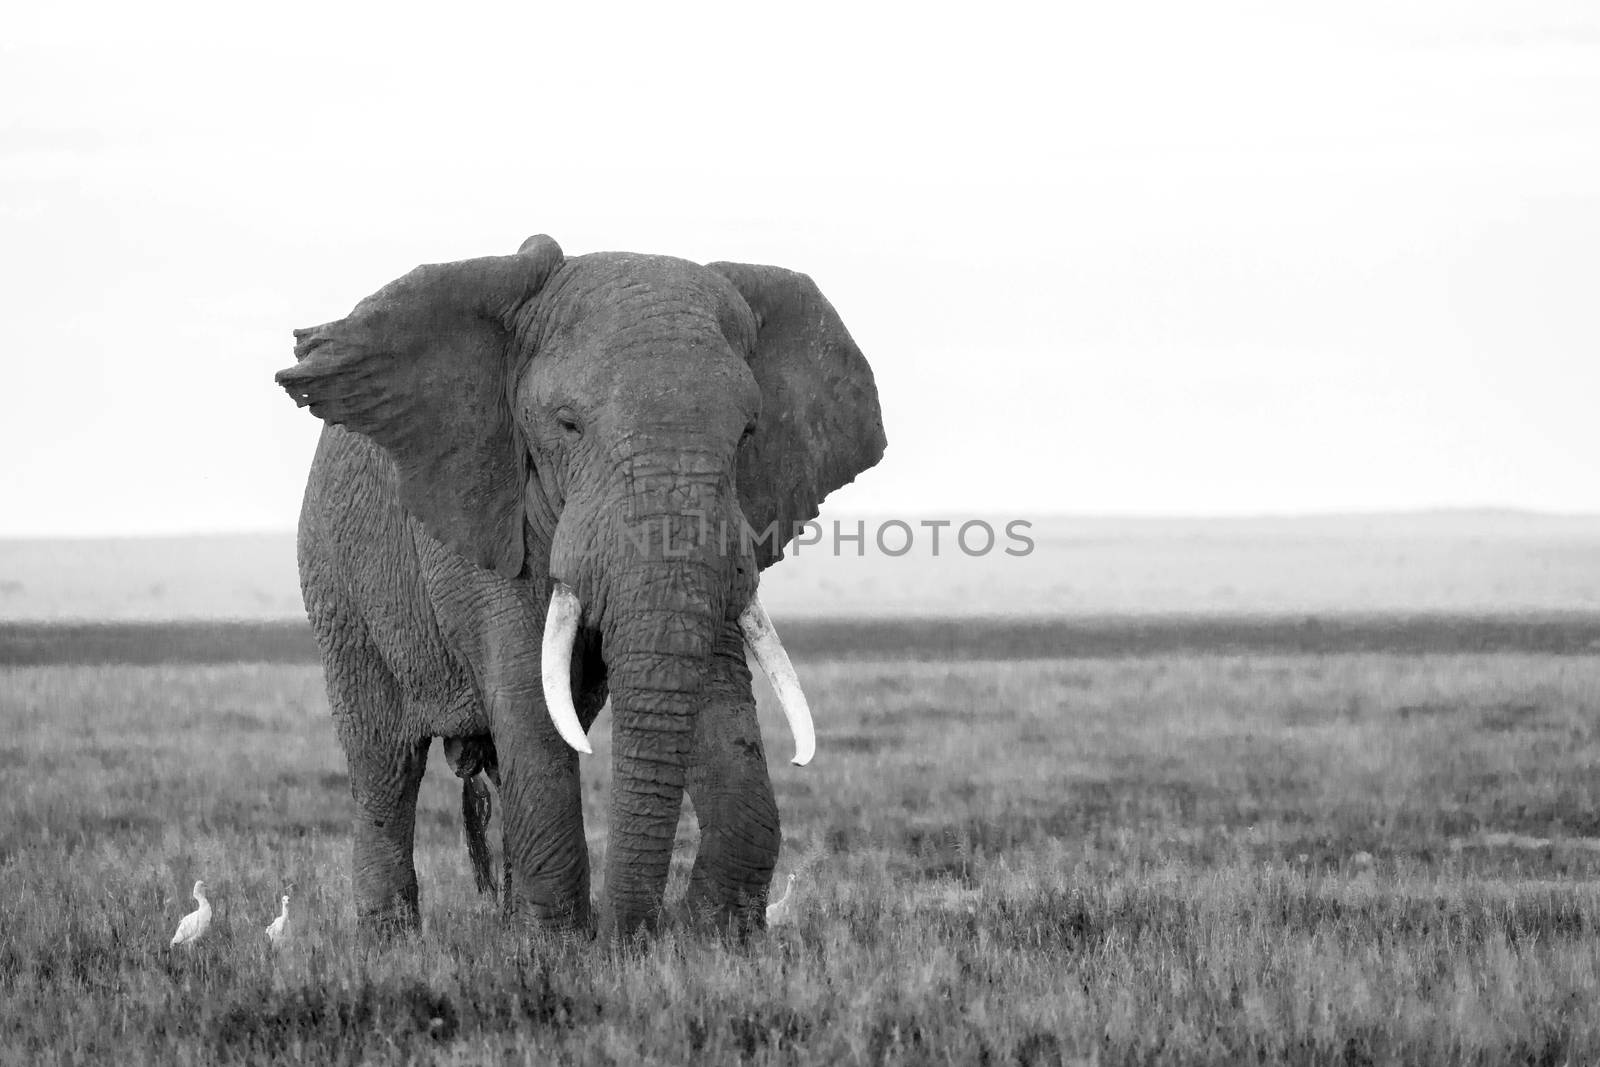 An elephant in the savannh of a national park by 25ehaag6